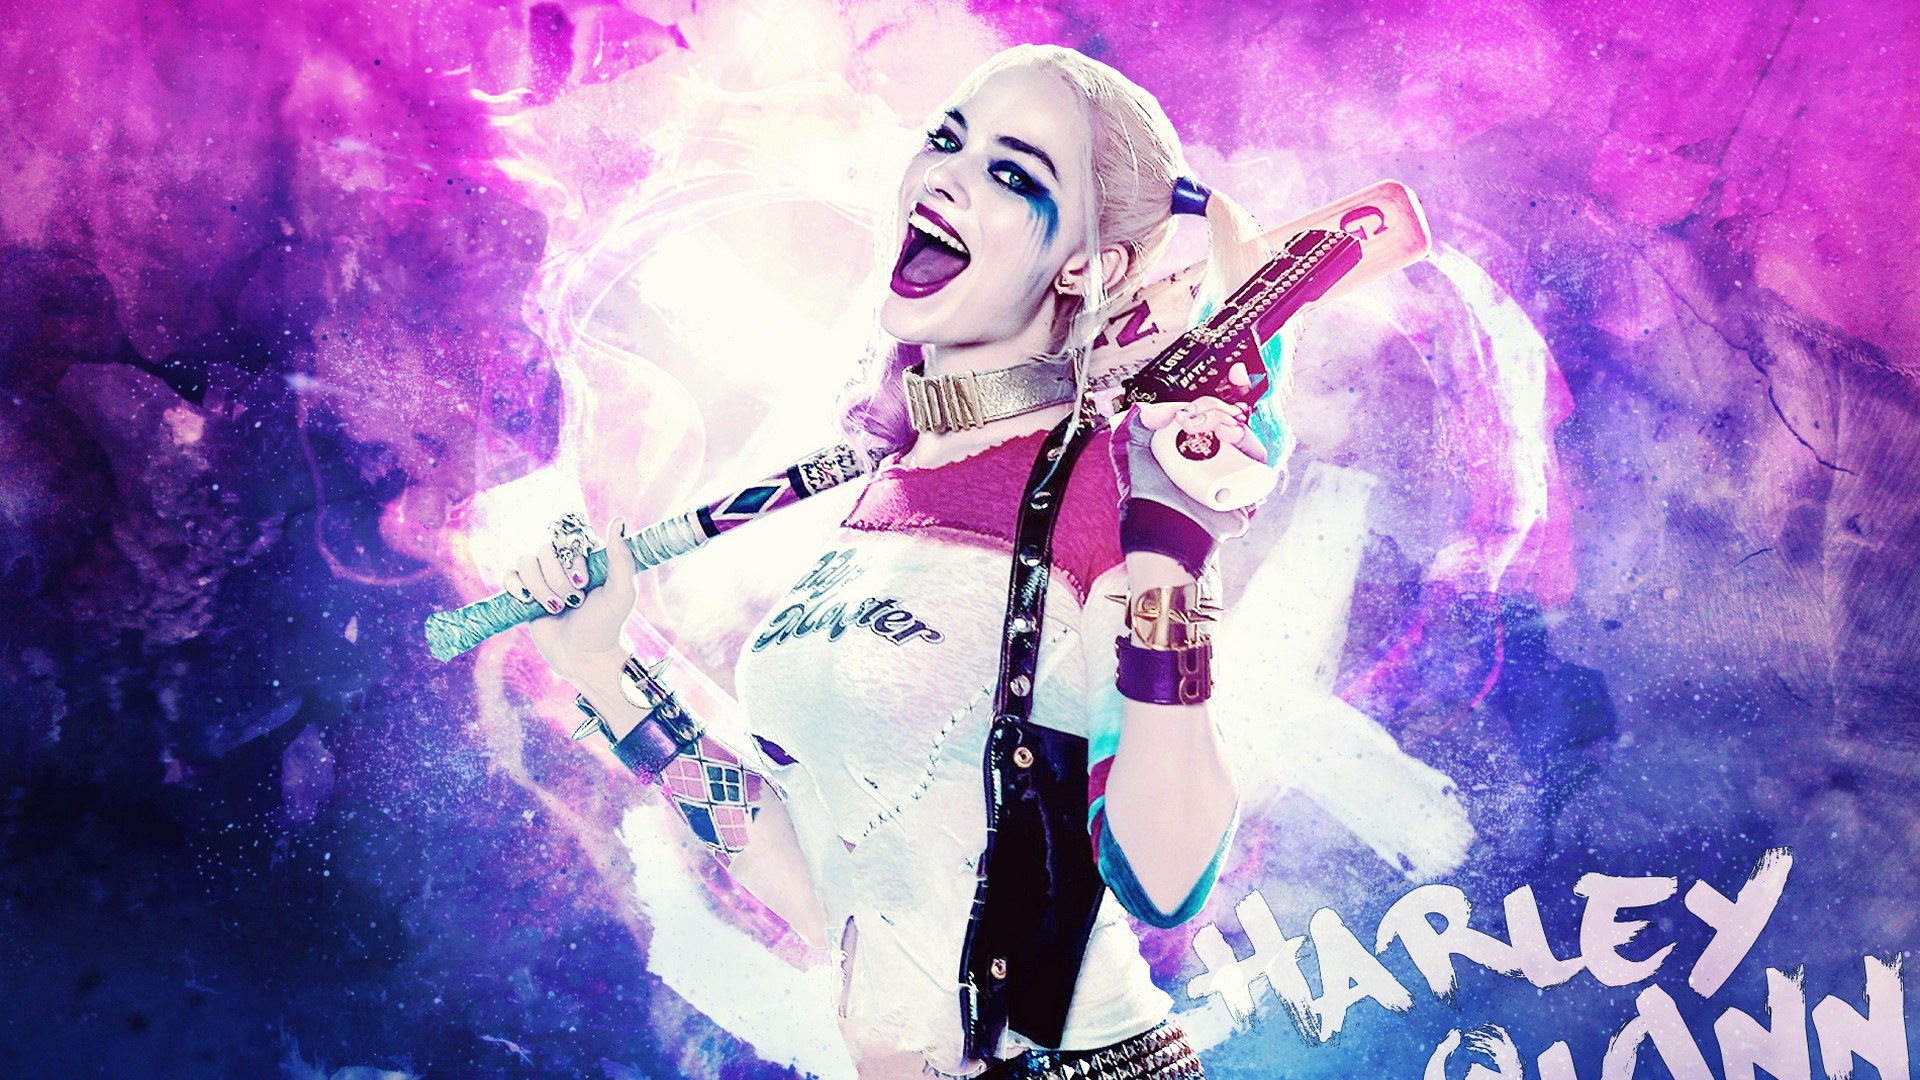 Harley Quinn Wallpaper with image resolution 1920x1080 pixel. You can use this wallpaper as background for your desktop Computer Screensavers, Android or iPhone smartphones